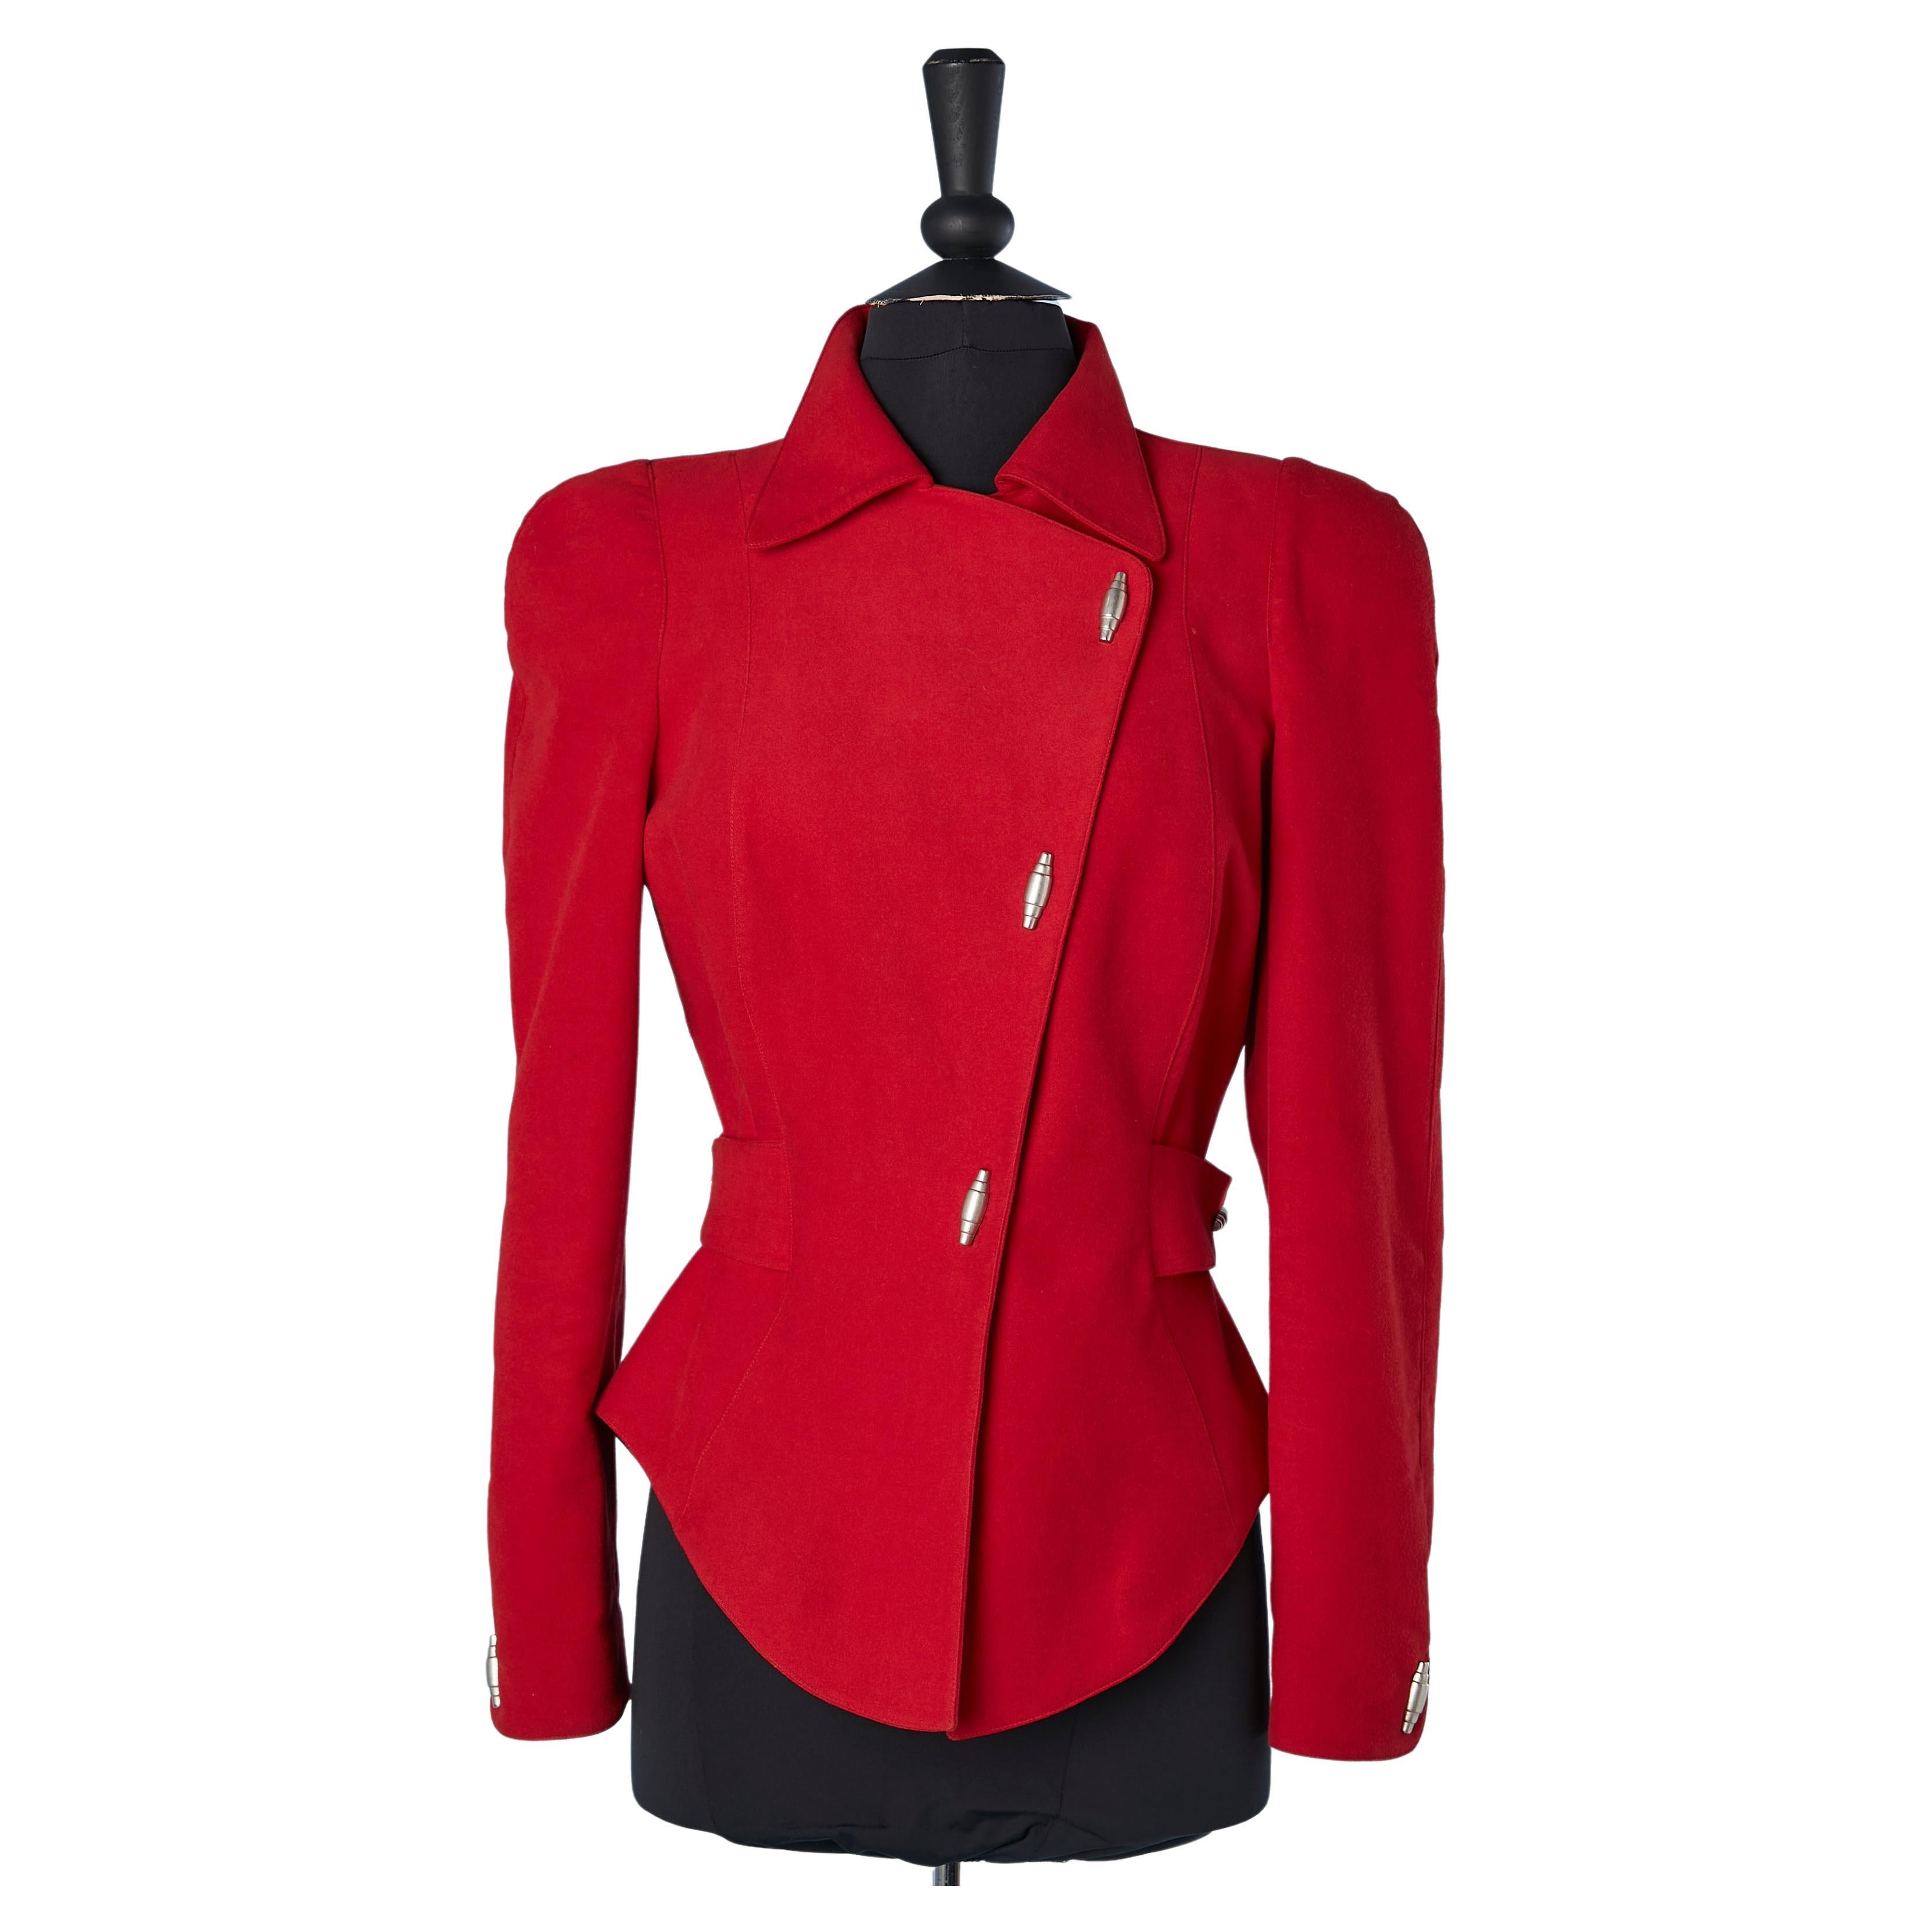 Red jacket with metallic snaps Thierry Mugler ACTIV 